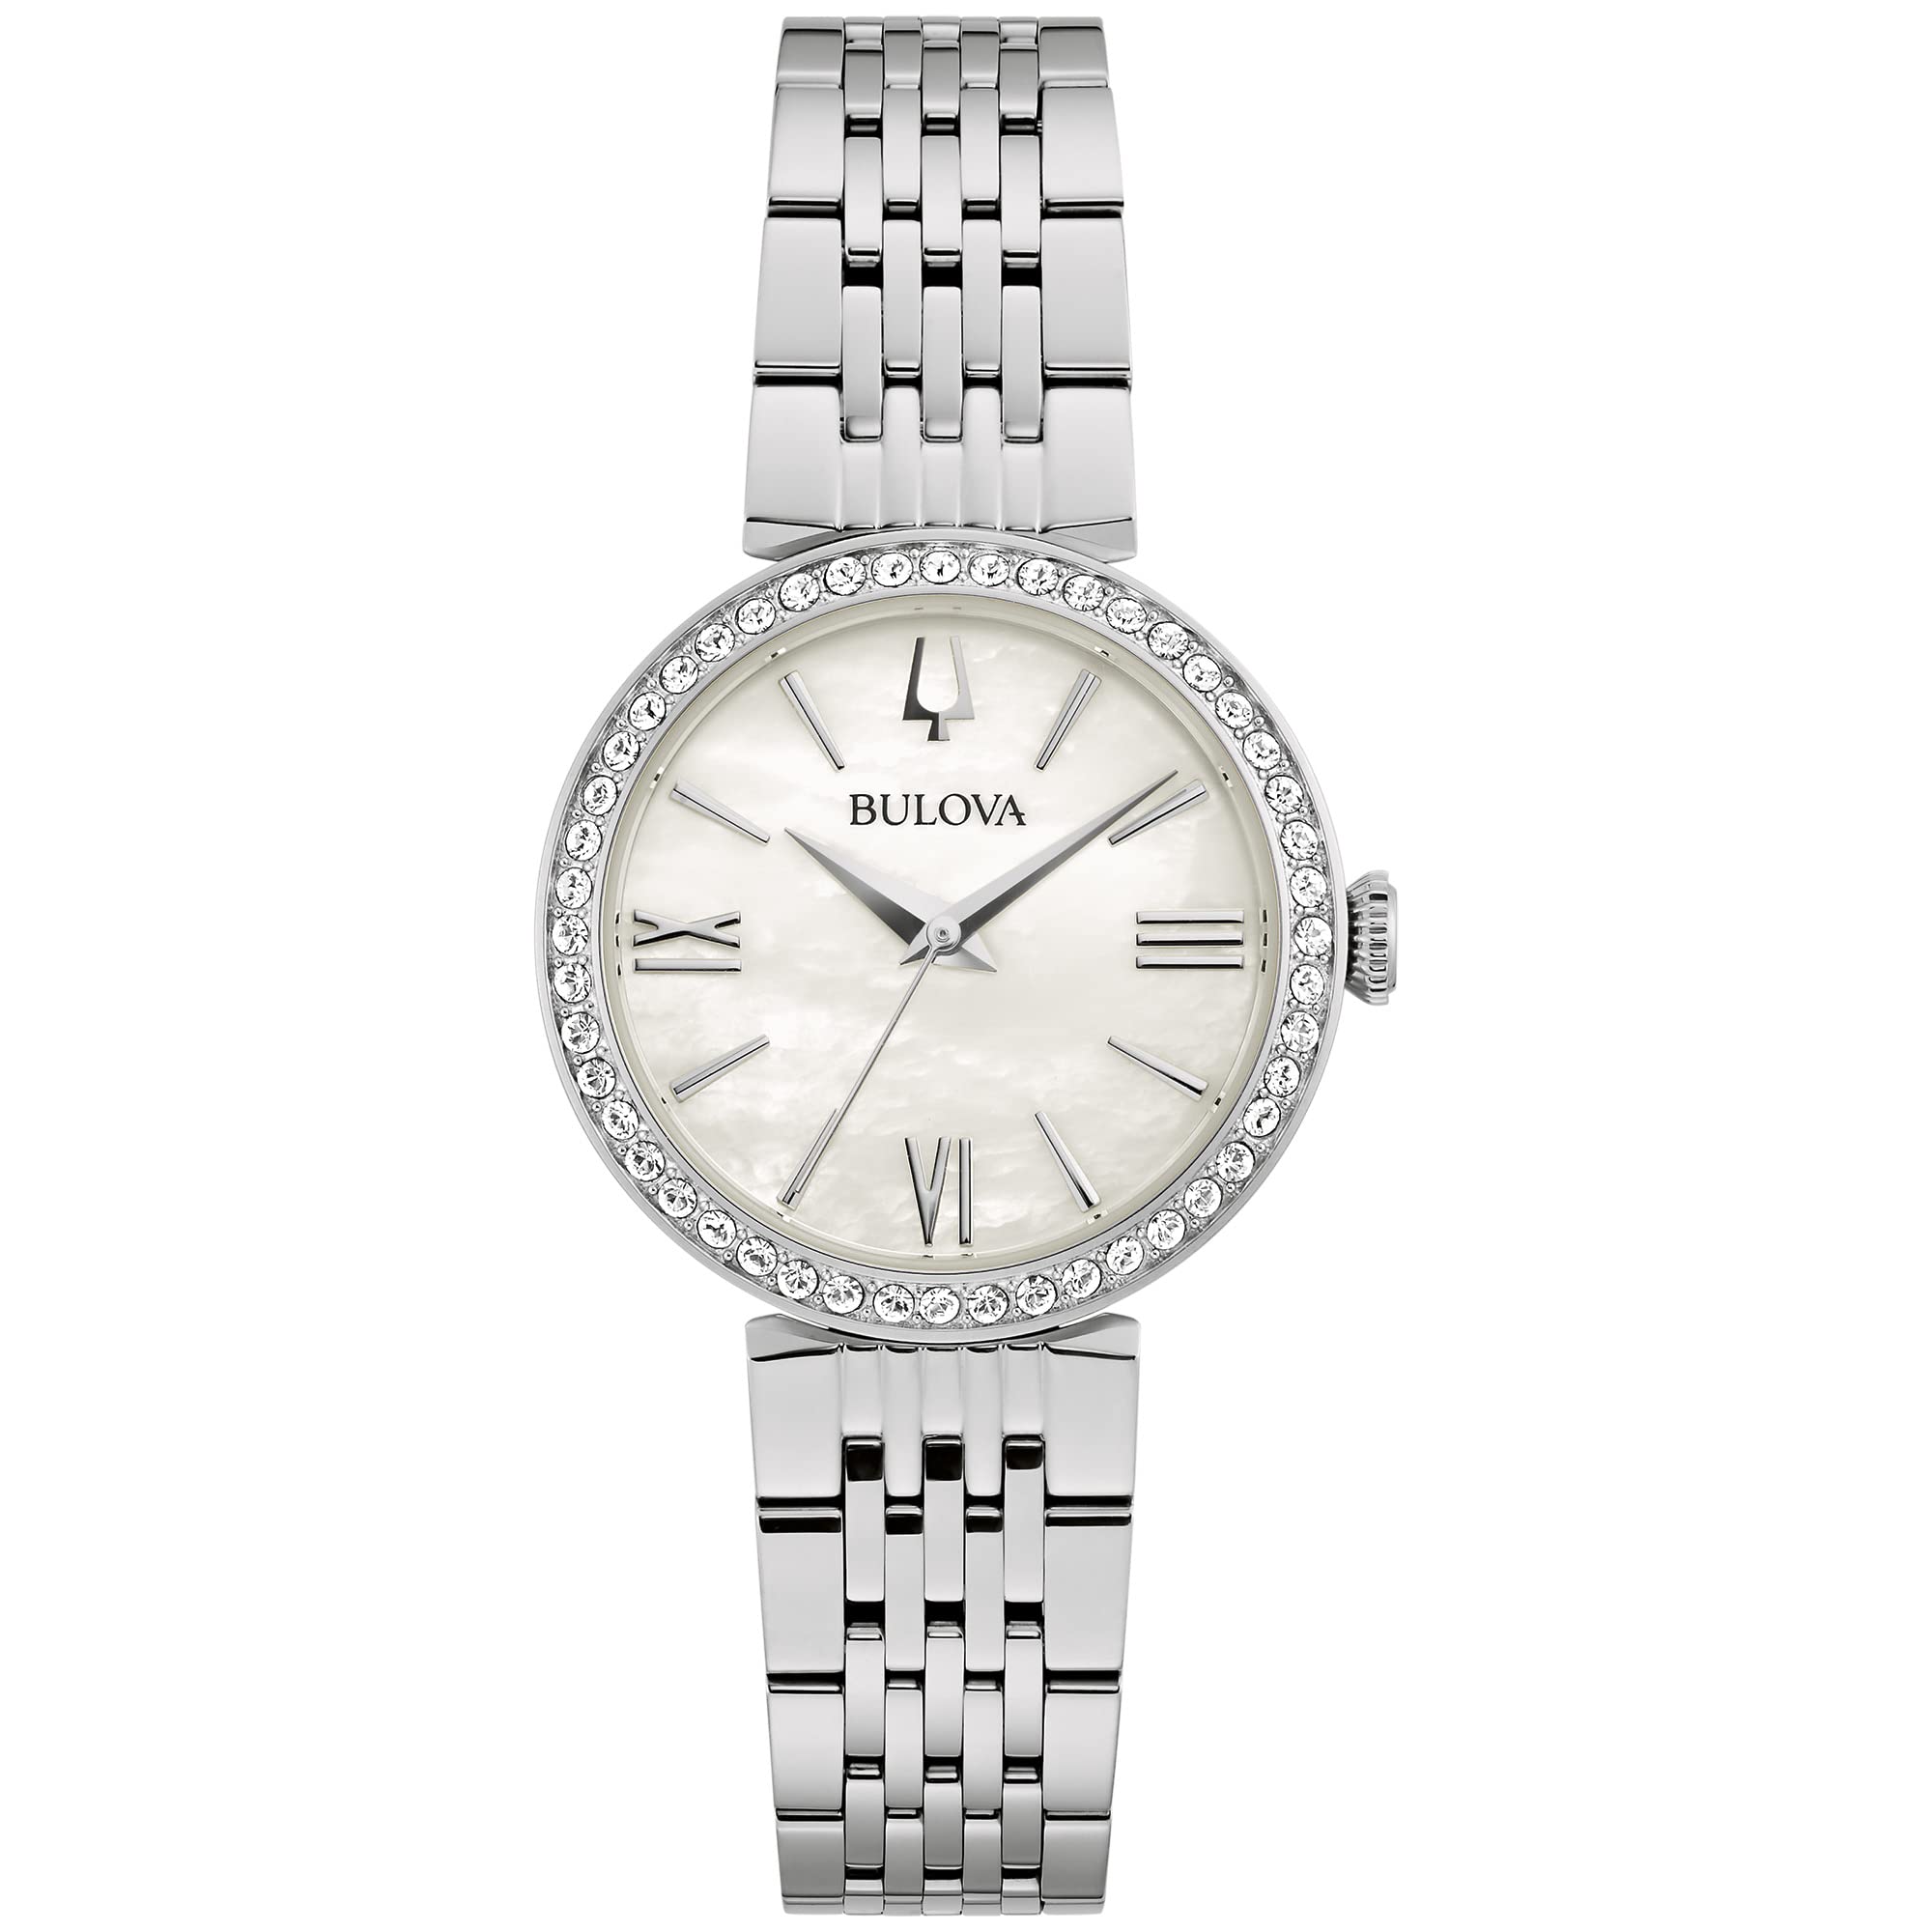 Bulova Ladies' Classic Crystal Stainless Steel 3-Hand Quartz Watch, White Mother-of-Pearl Dial